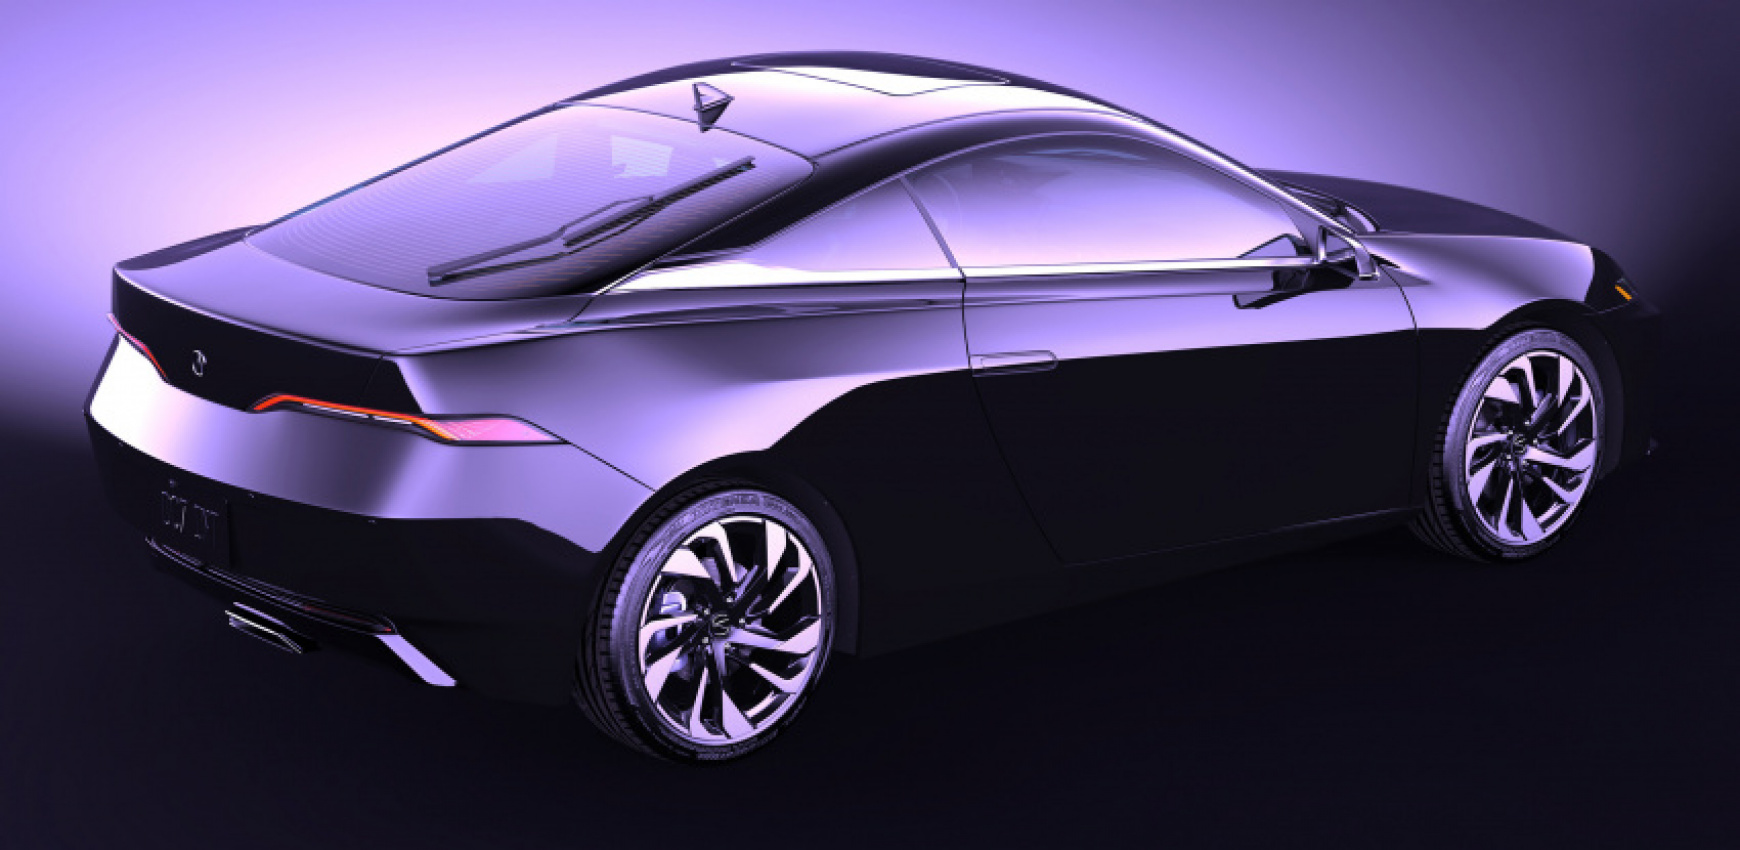 acura, autos, cars, news, acura integra, renderings, if only the new 2023 acura integra looked something like this unofficial coupe render